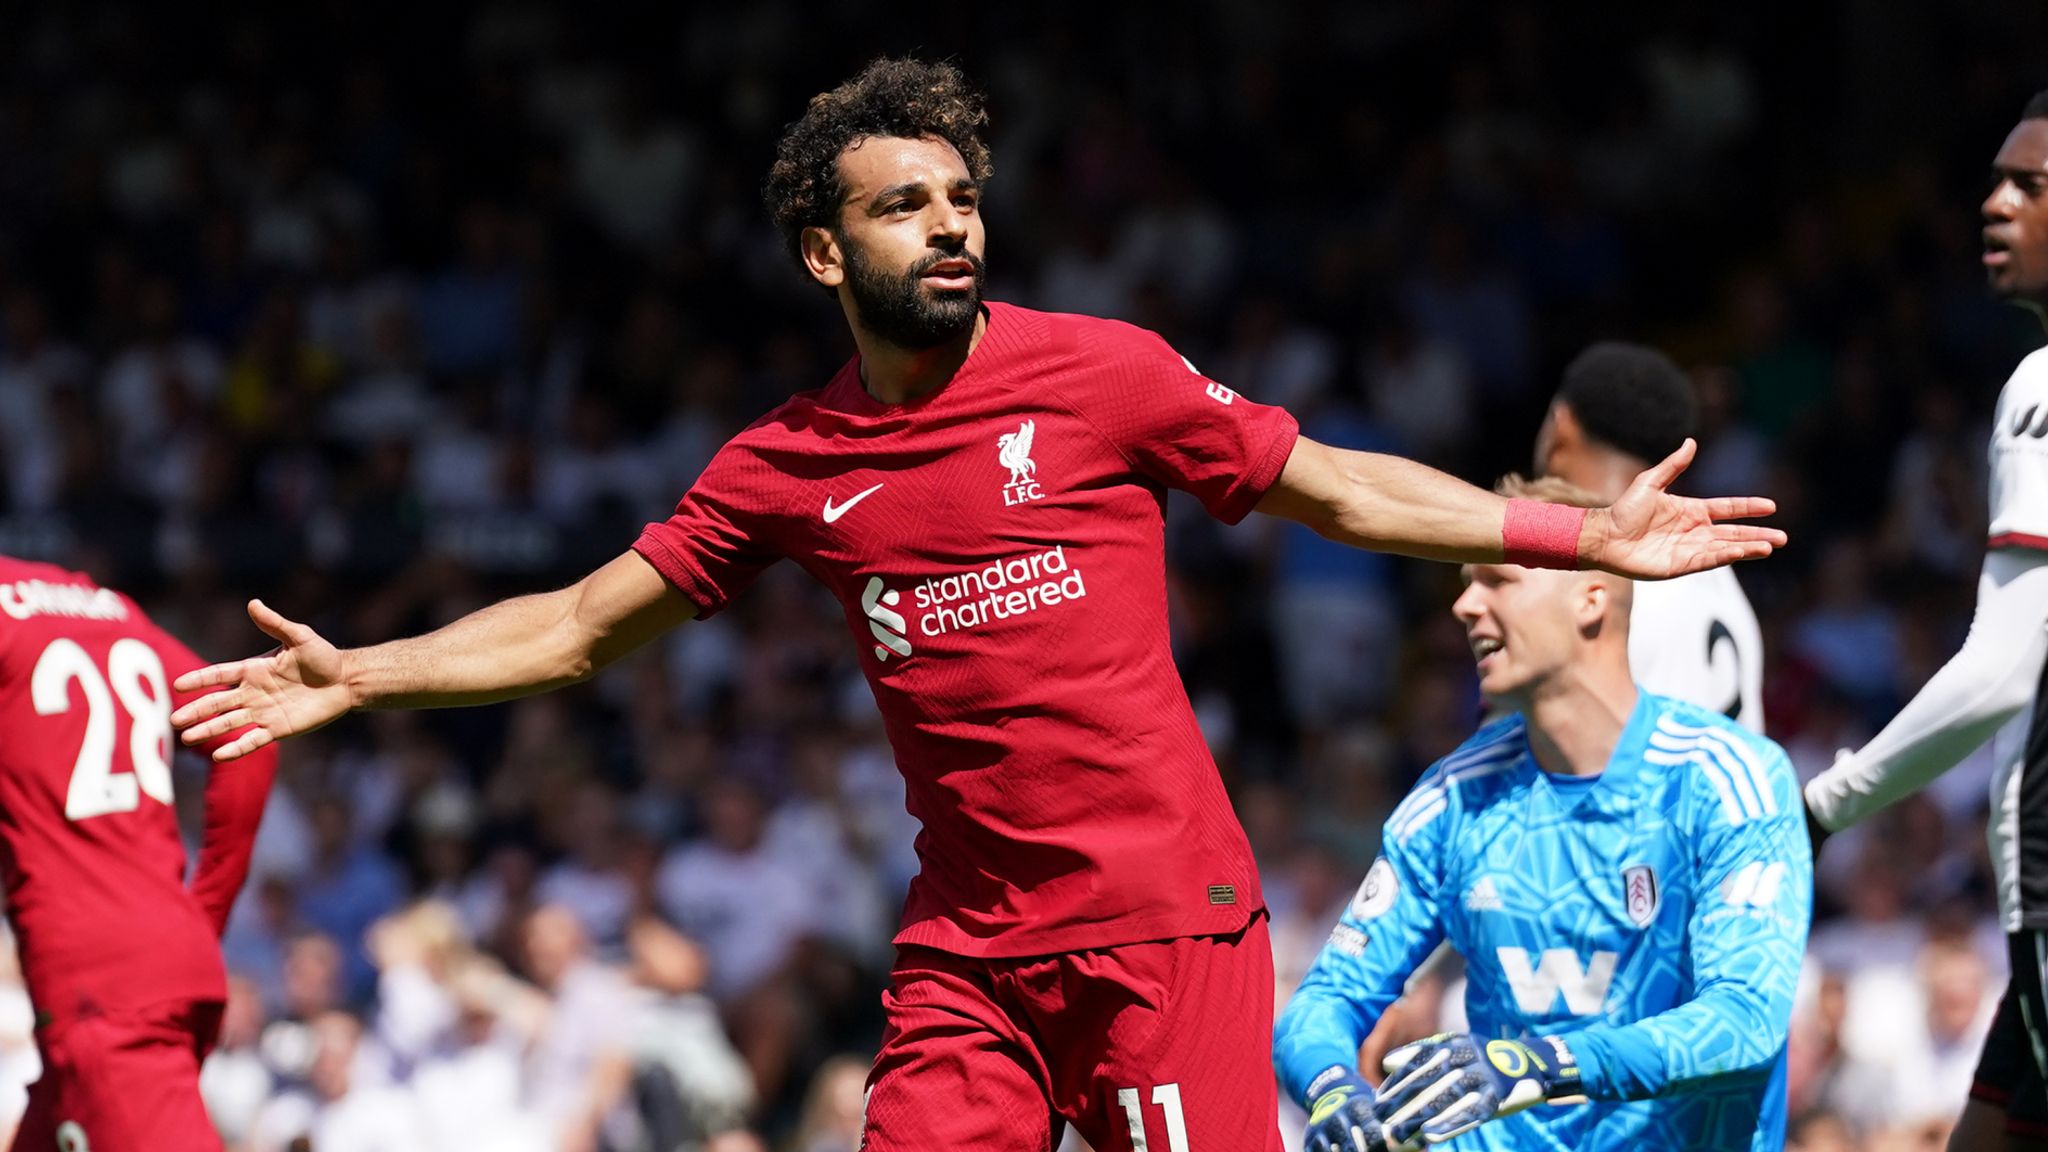 Fulham 2-2 Liverpool: Aleksandar Mitrovic scores twice but Mohamed rescues Reds with late equaliser Football News | Sky Sports